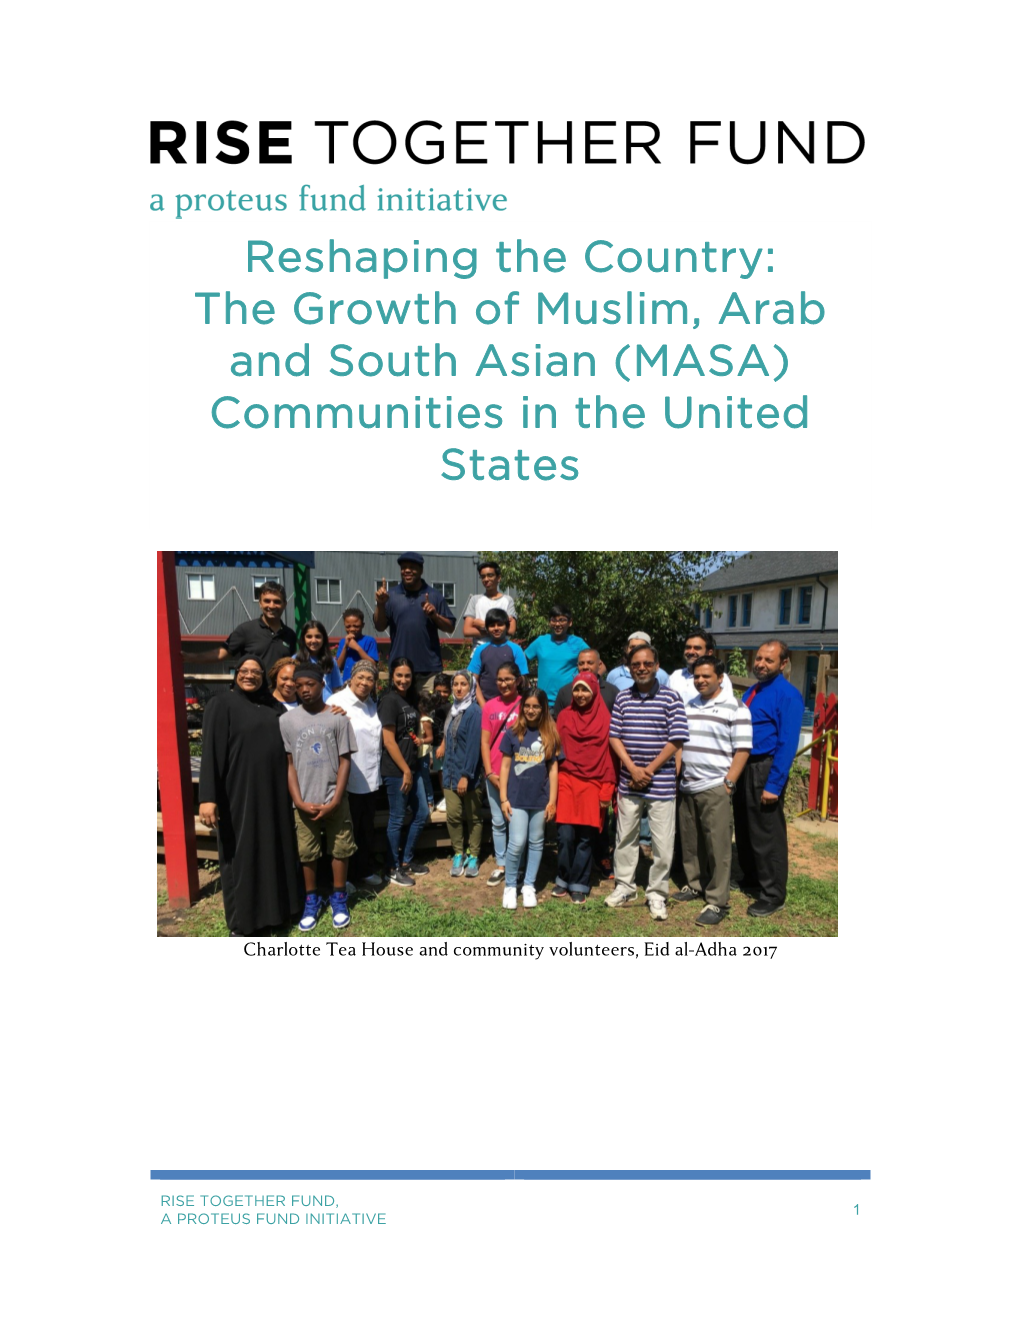 Reshaping the Country: the Growth of Muslim, Arab and South Asian (MASA) Communities in the United States